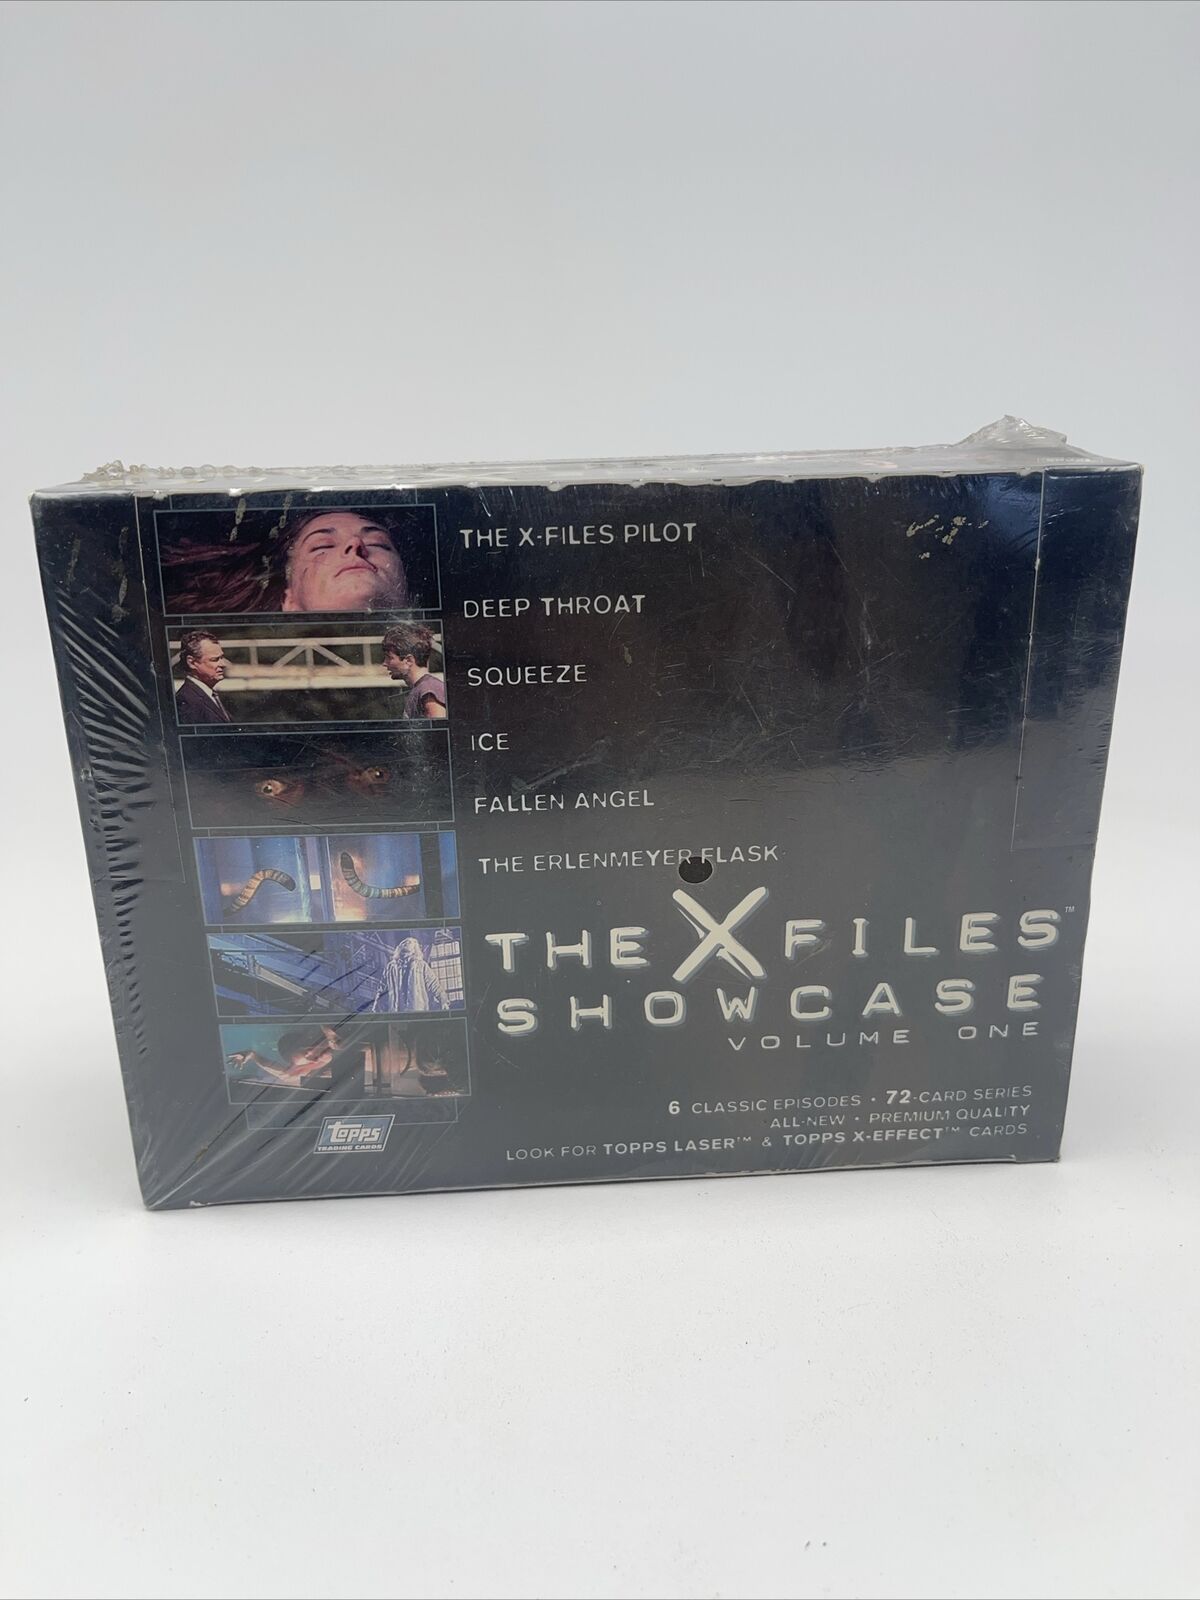 Topps 1997 The X-Files Showcase Volume One Trading Cards Sealed Box of 36 Packs